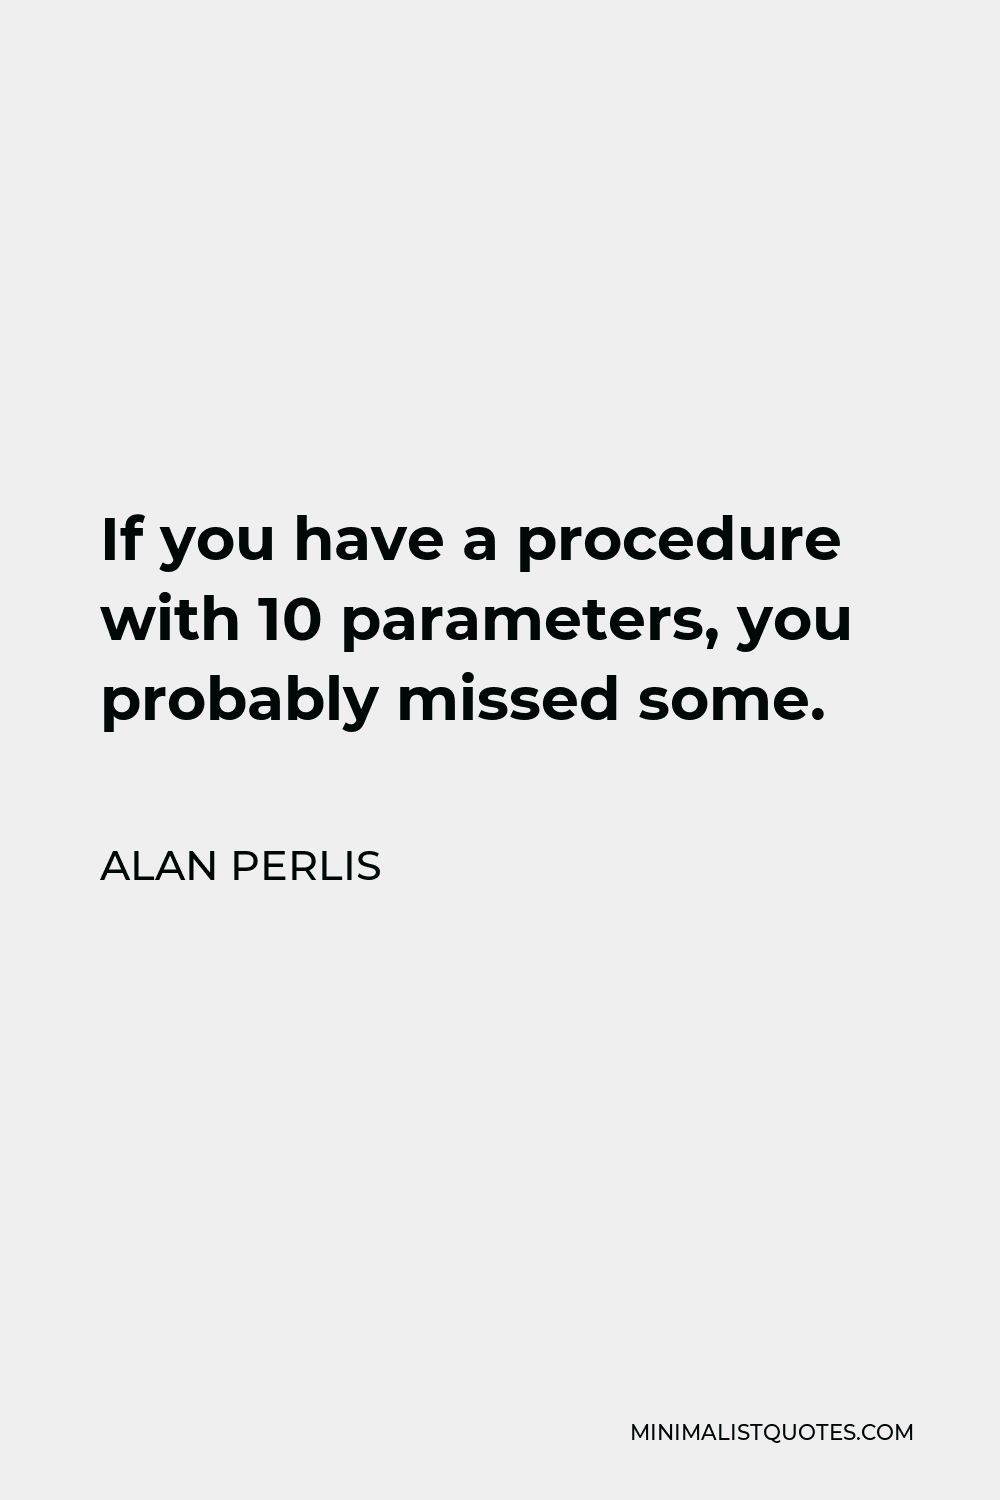 Alan Perlis Quote - If you have a procedure with 10 parameters, you probably missed some.